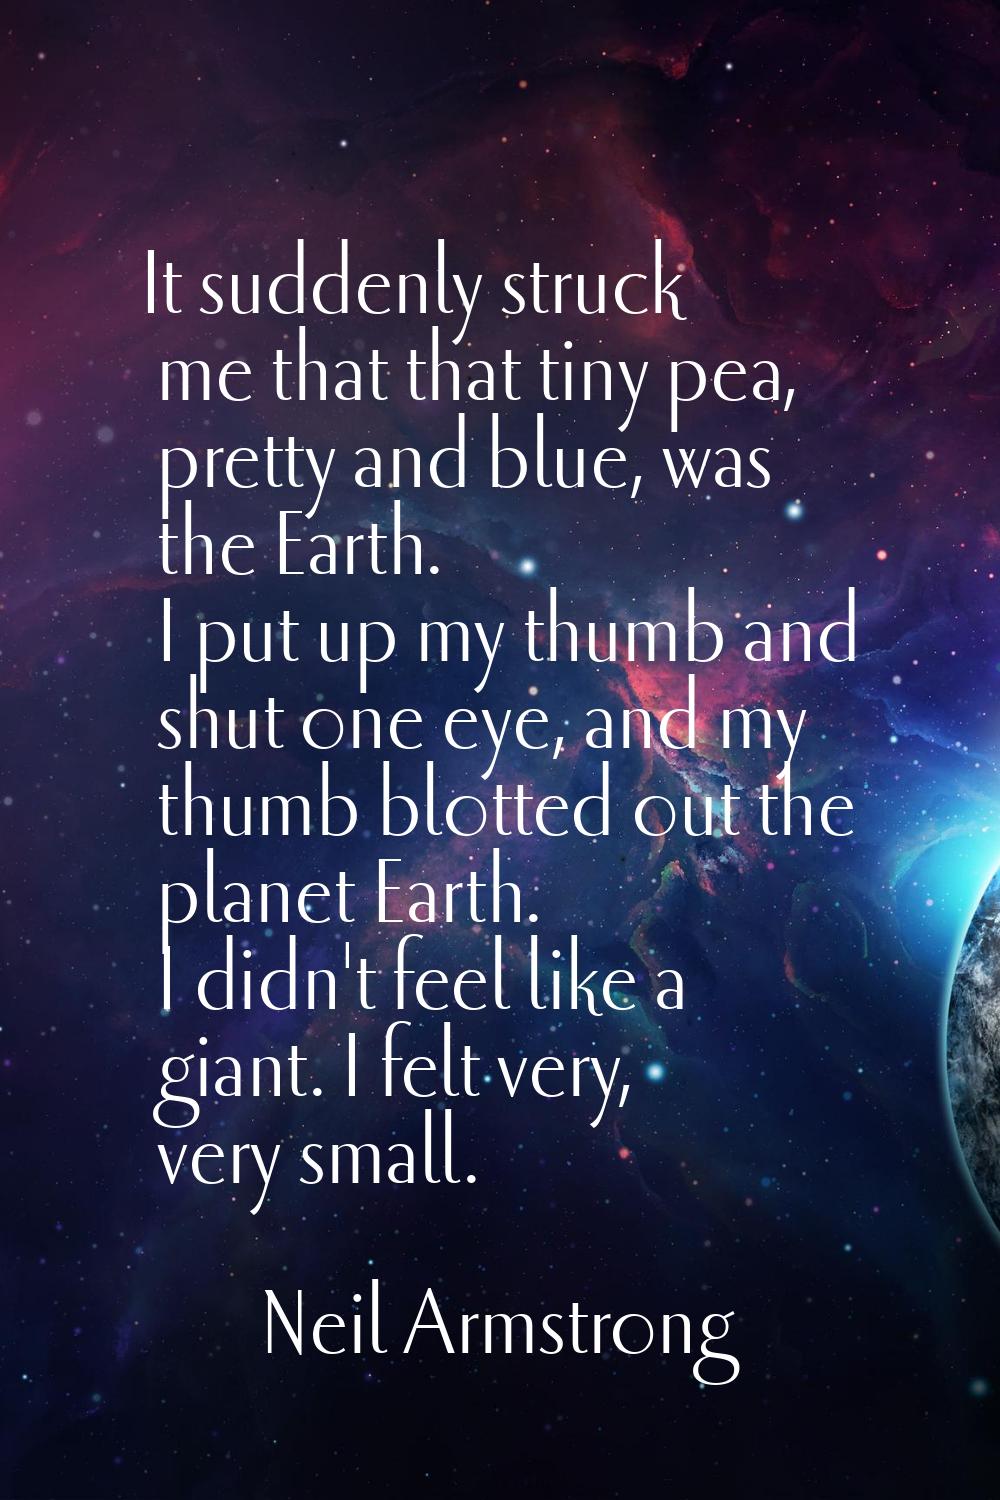 It suddenly struck me that that tiny pea, pretty and blue, was the Earth. I put up my thumb and shu